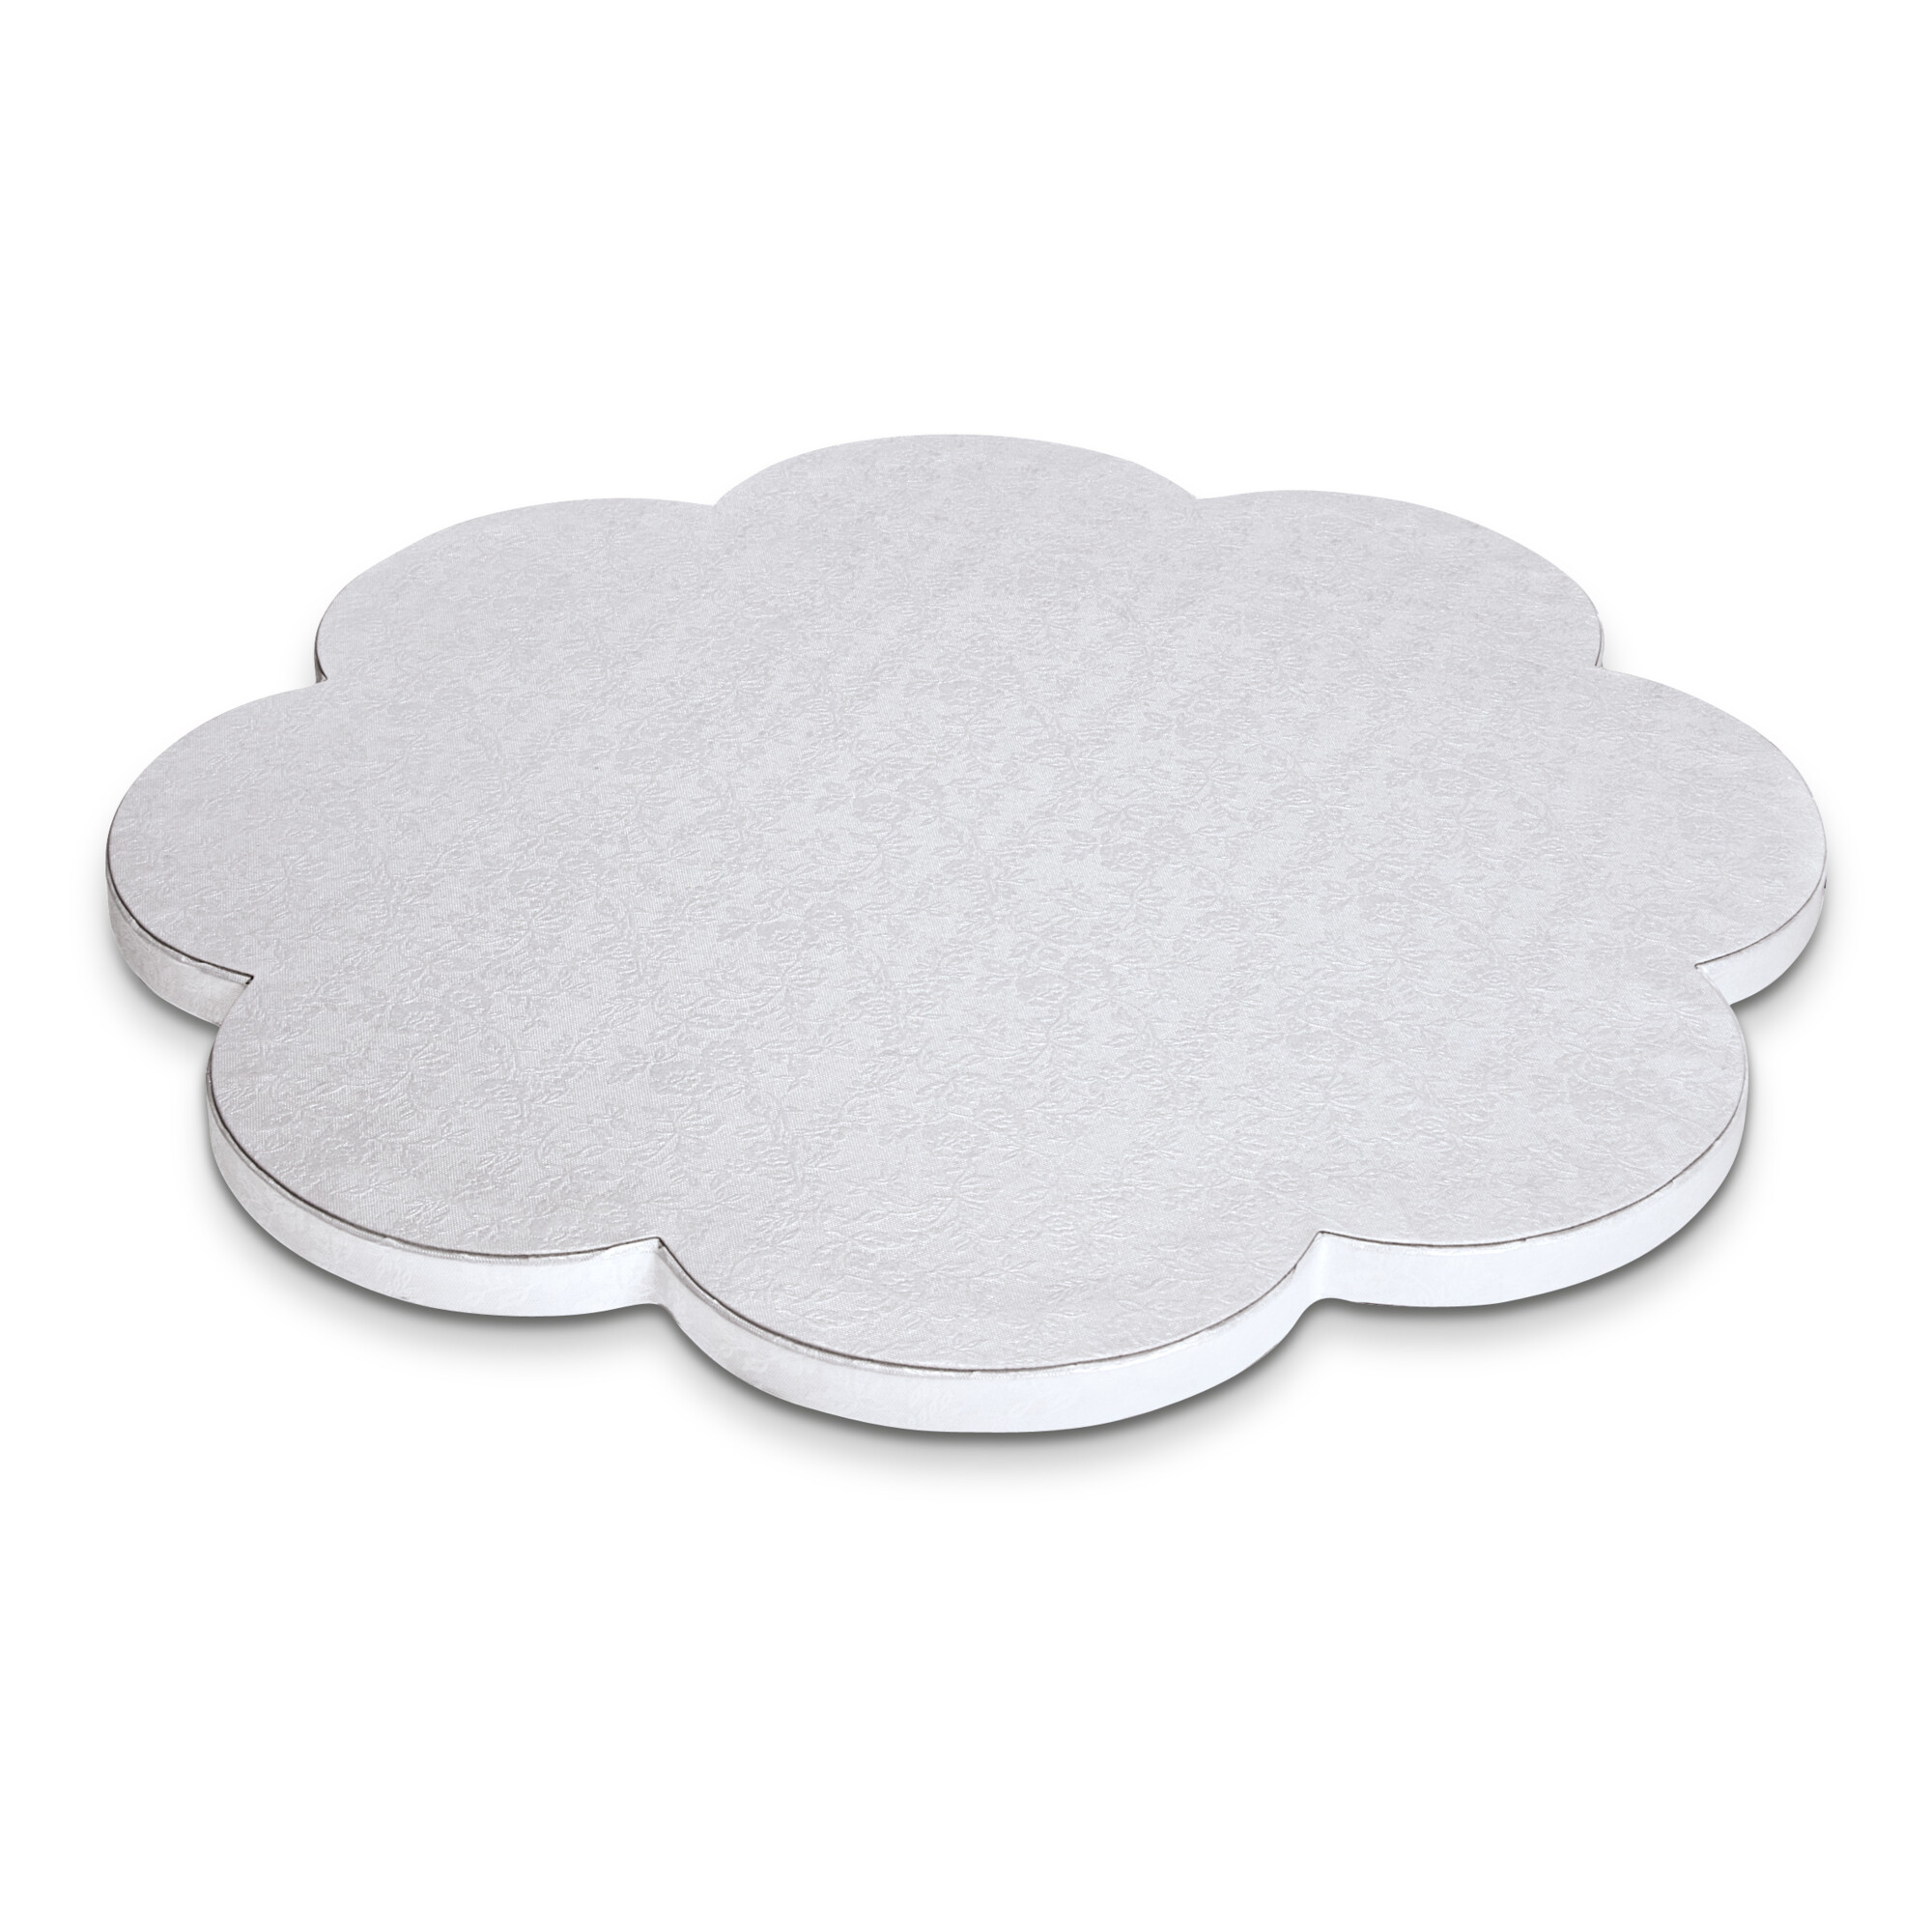 Cake board – Rosette – extra strong